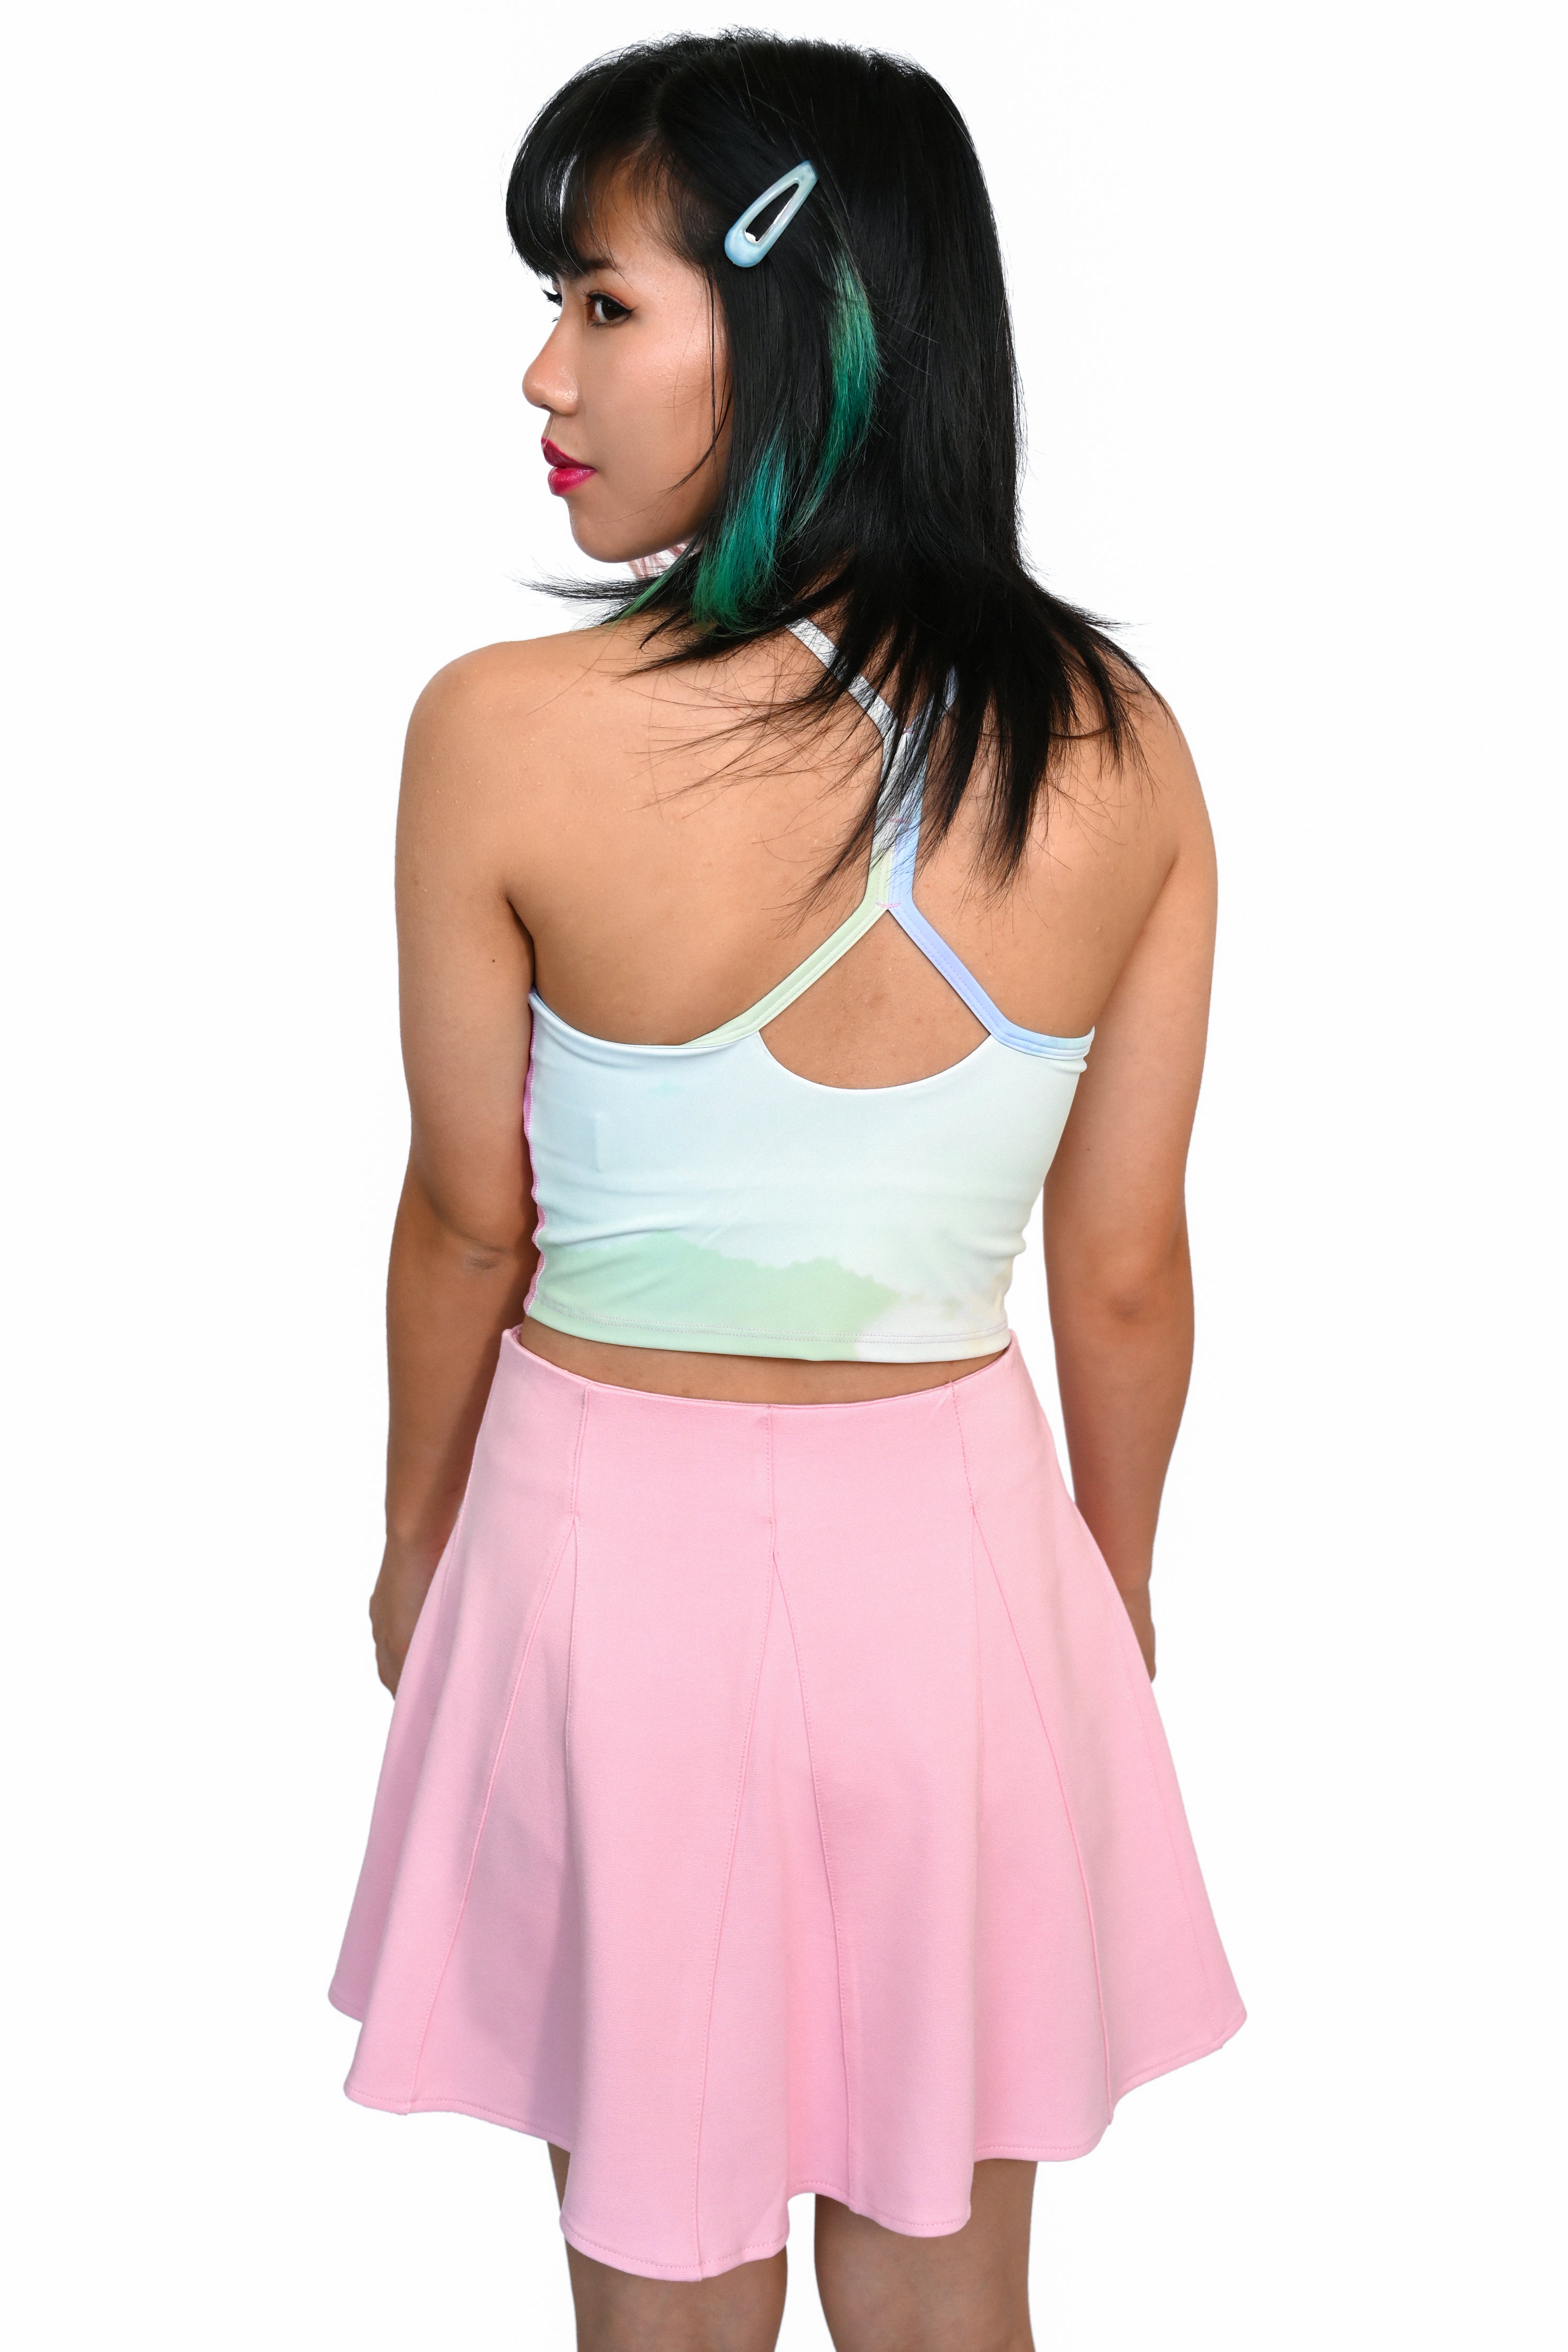 perfect pink tennis inspired skirt with built in shorts